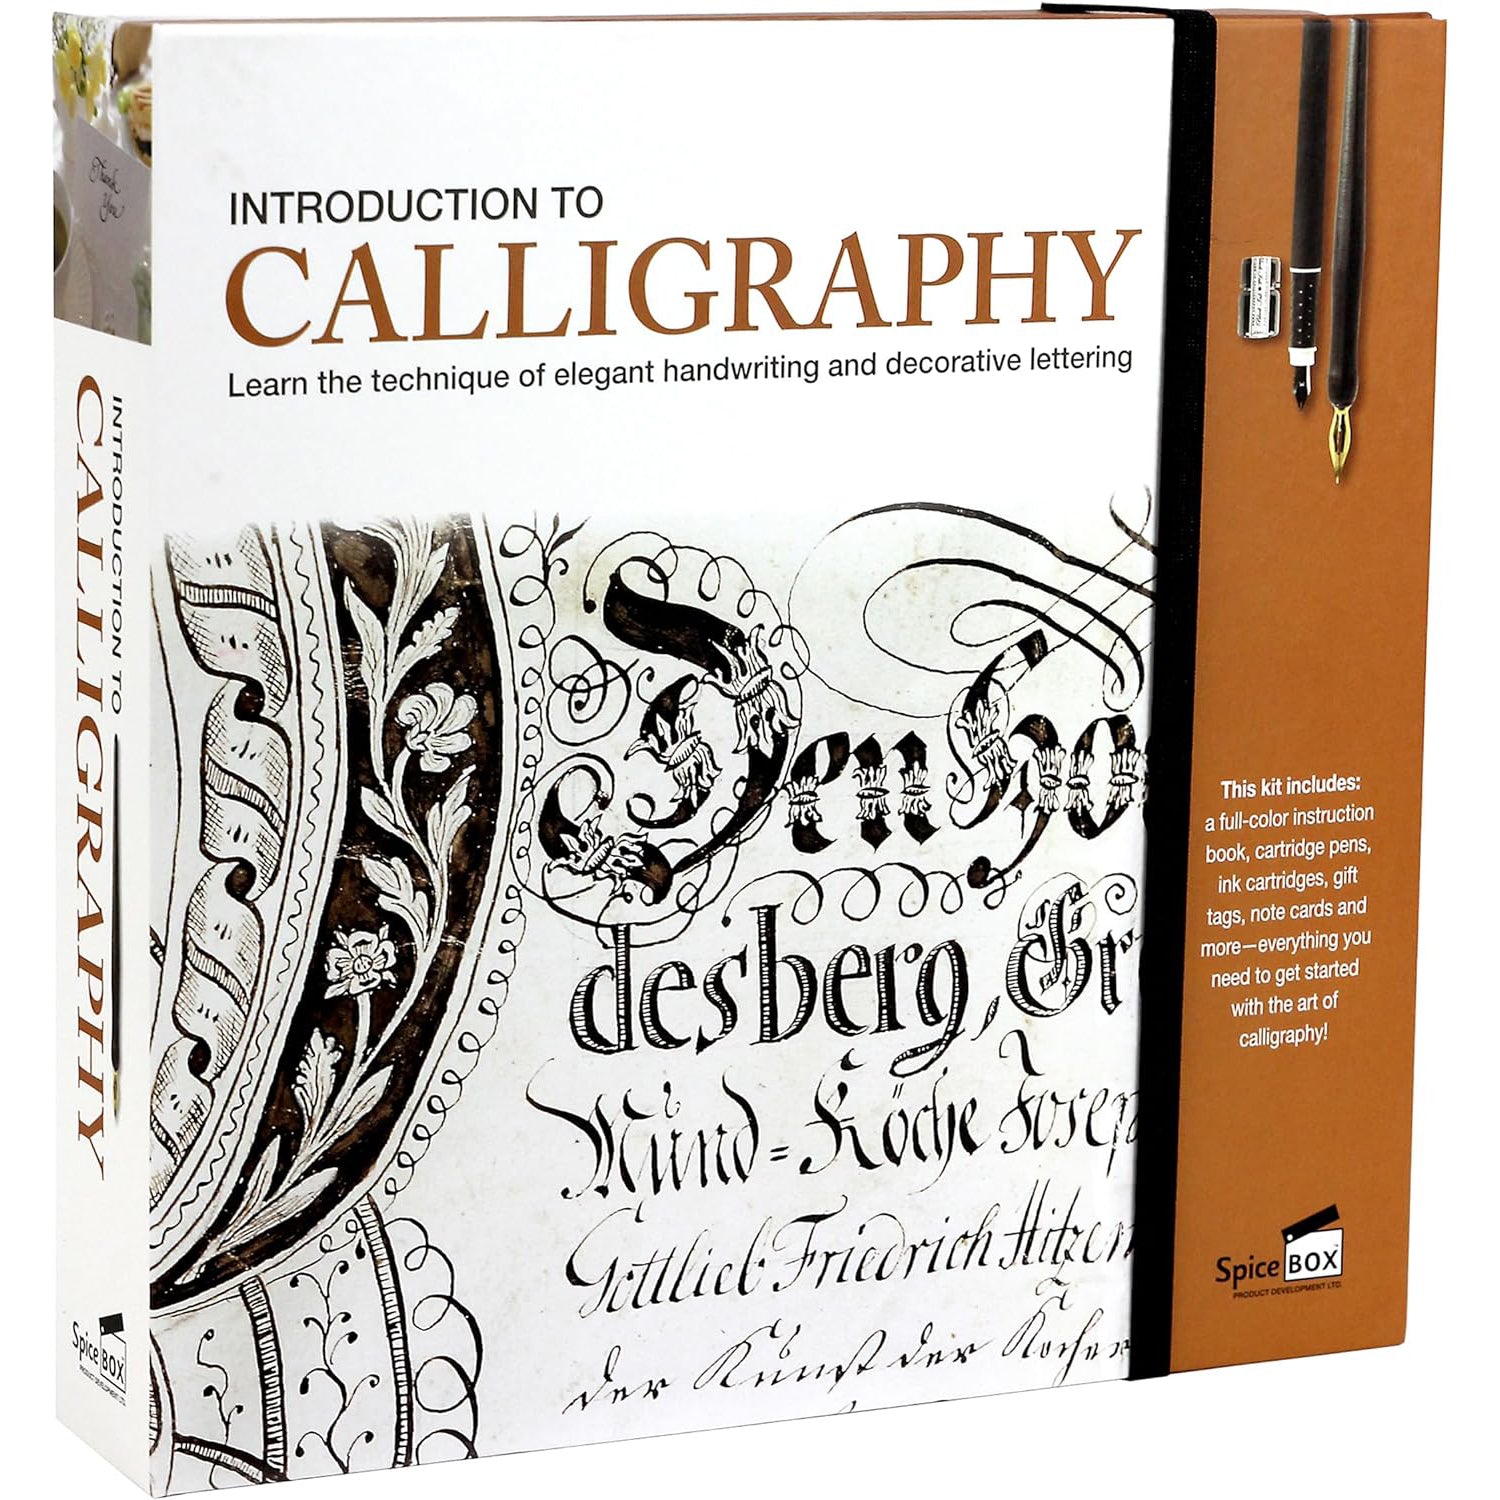 Introduction to Calligraphy Kit - Getty Museum Store